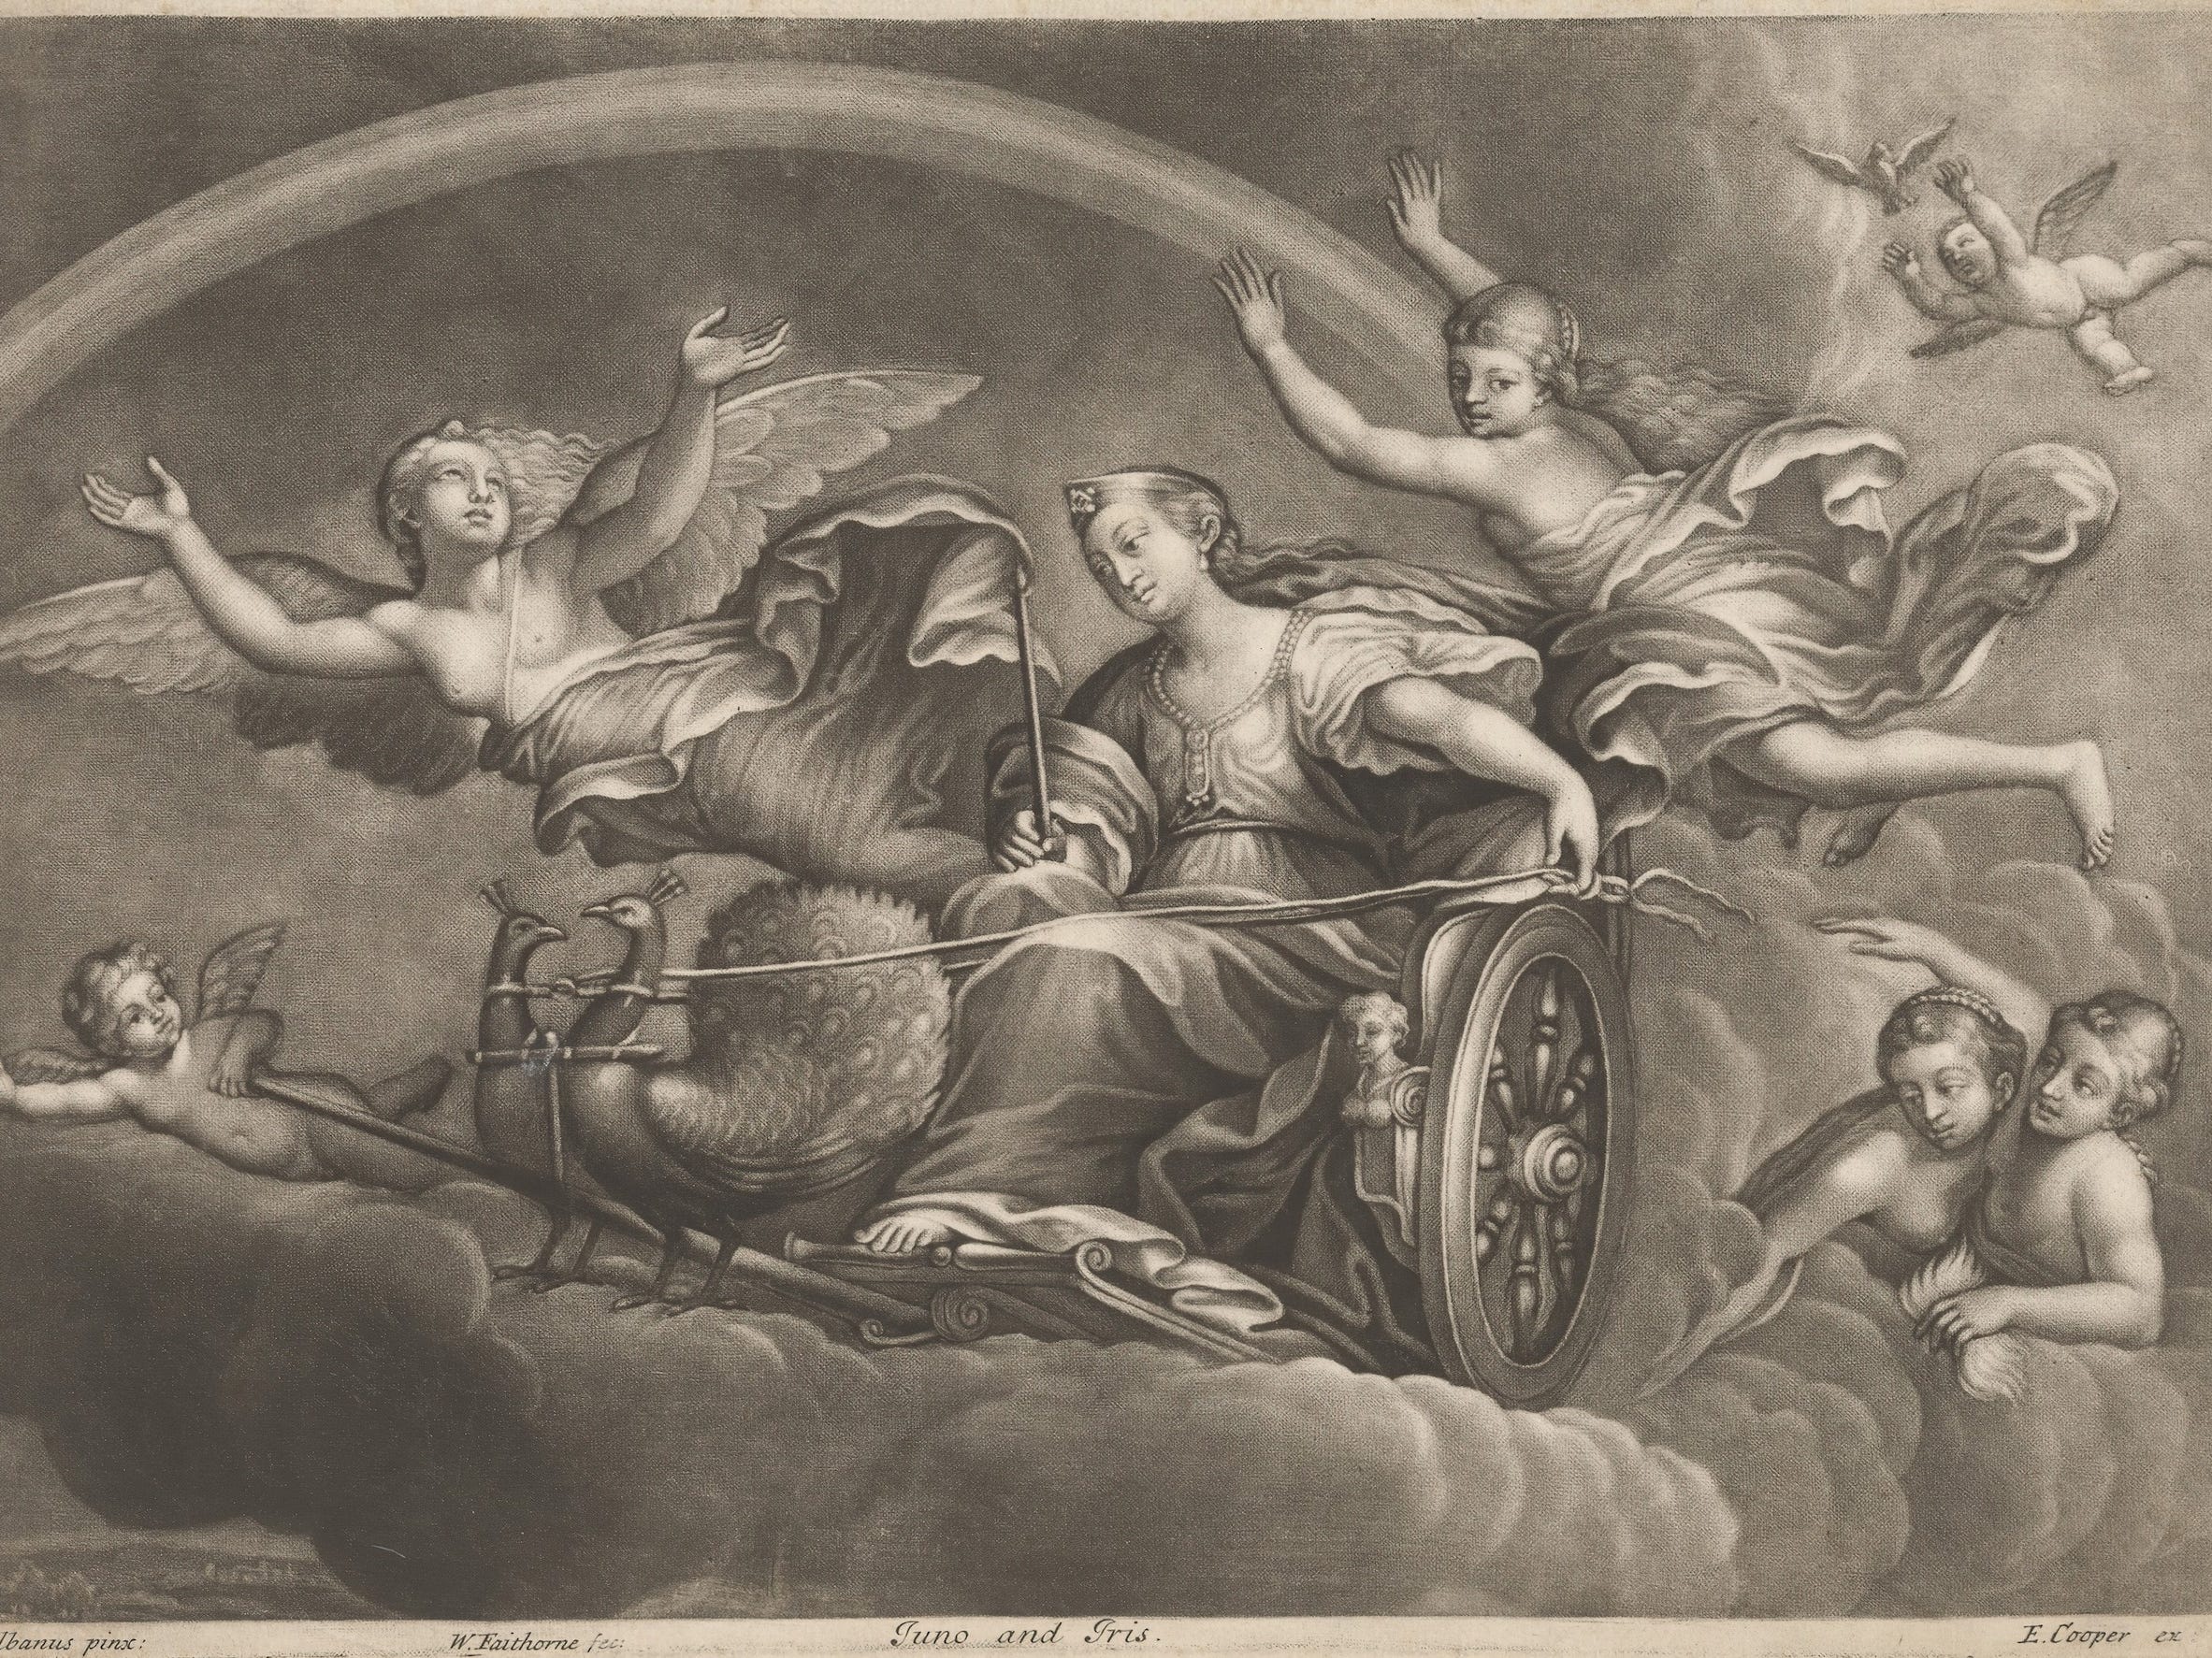 Juno and Iris in a chariot pulled by peacocks in the sky surrounded by angels